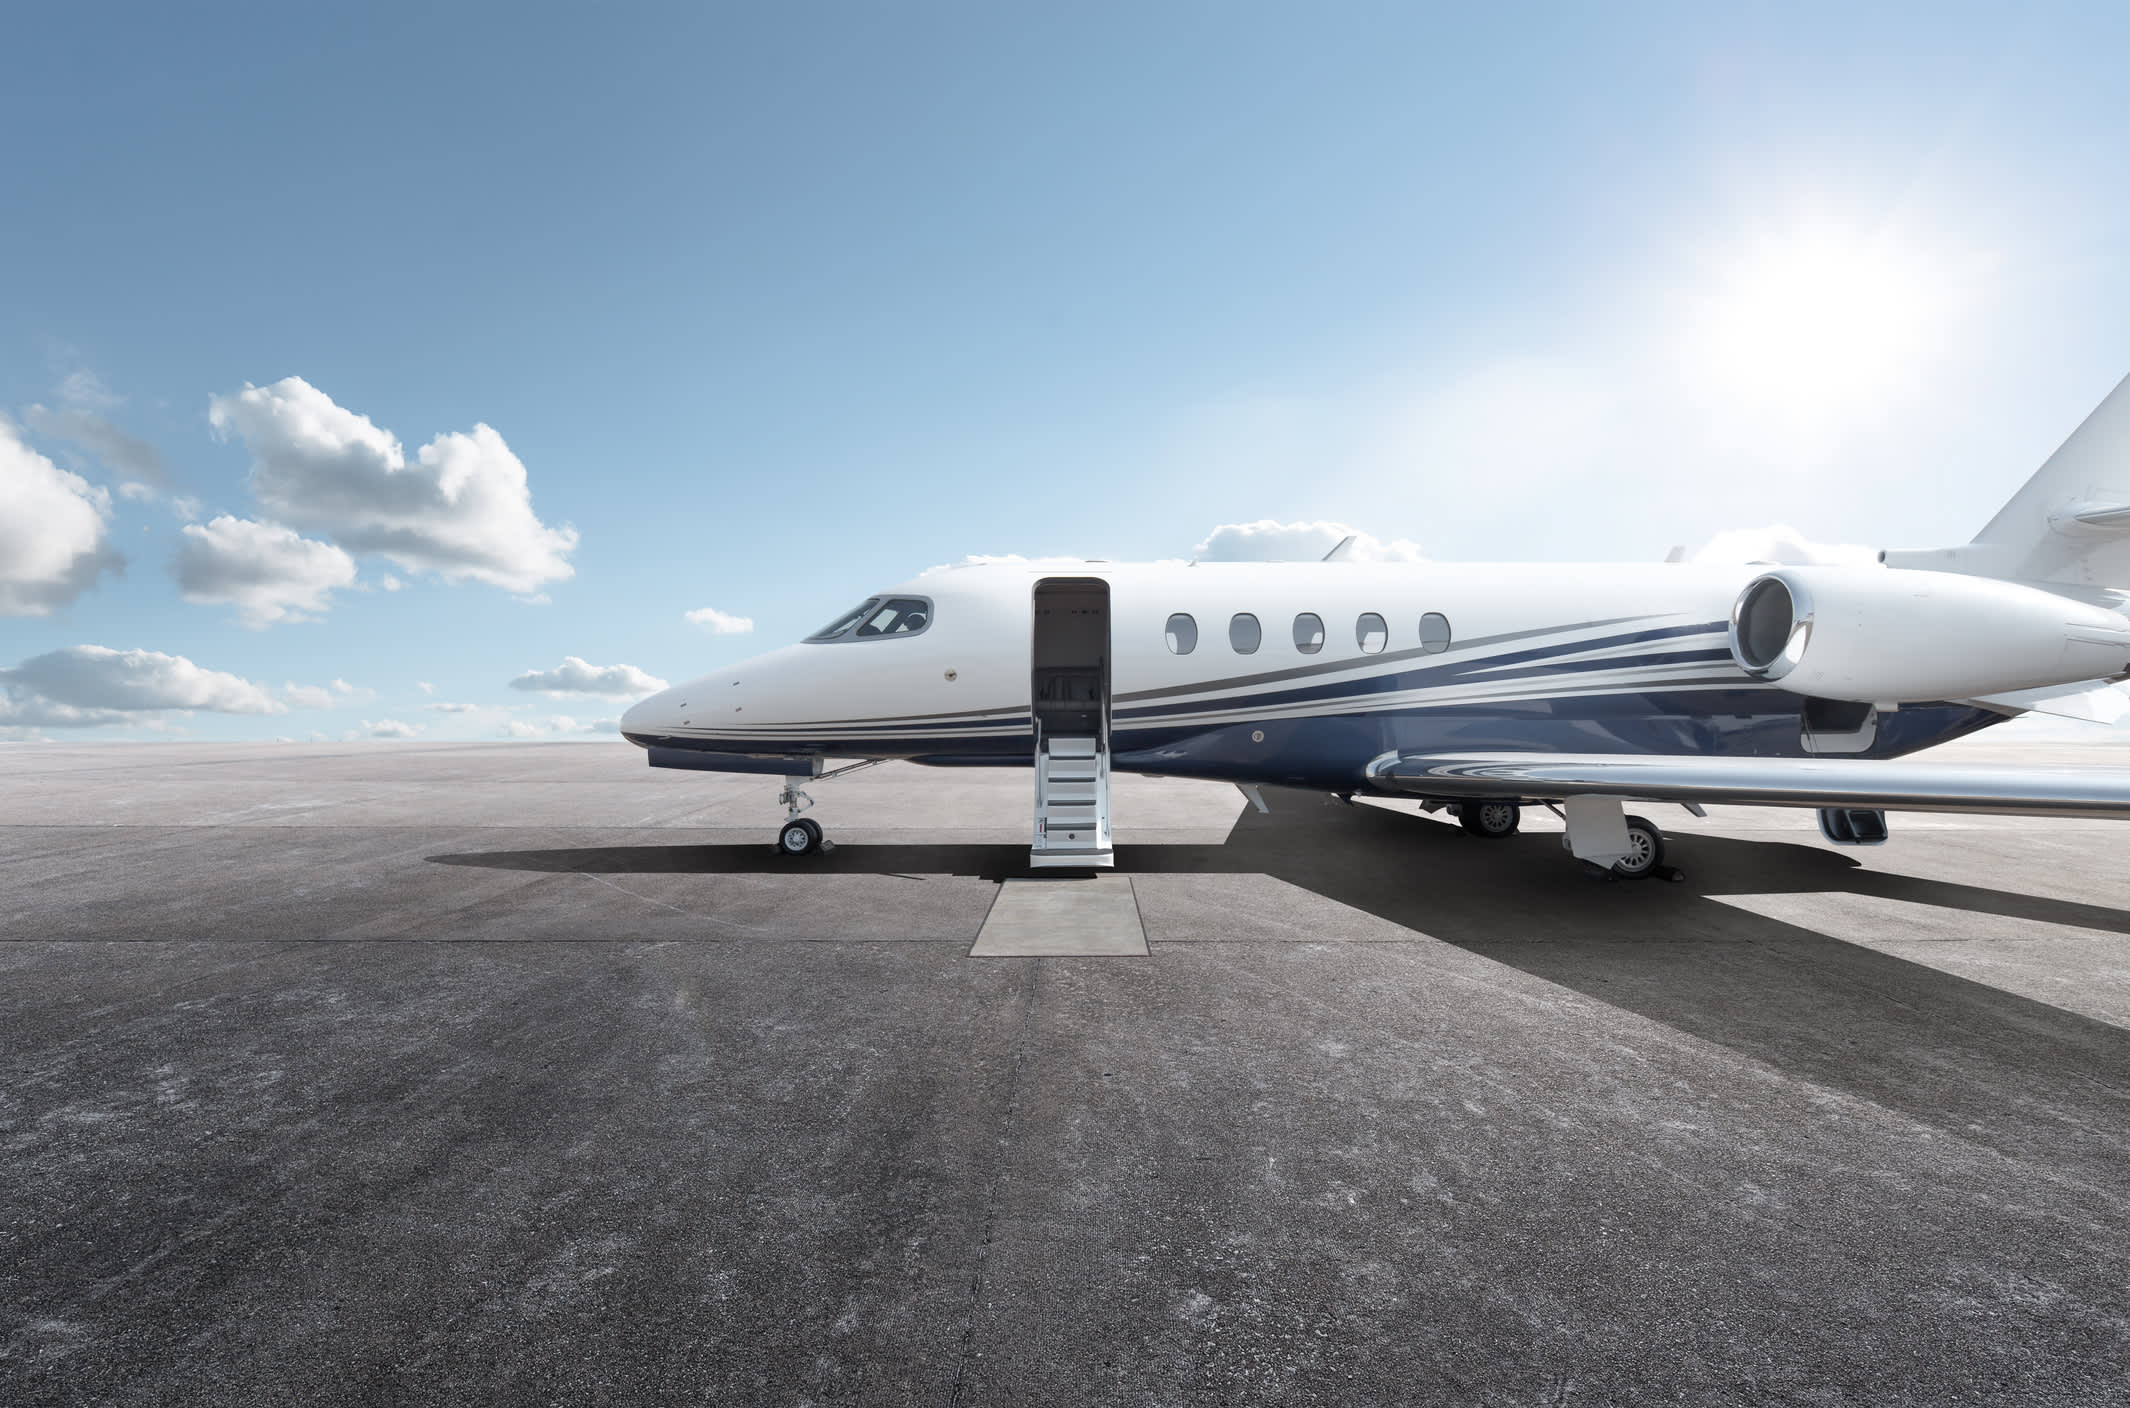 Top 4 Reasons Private Jet Charter is Safer Than Commercial Airlines